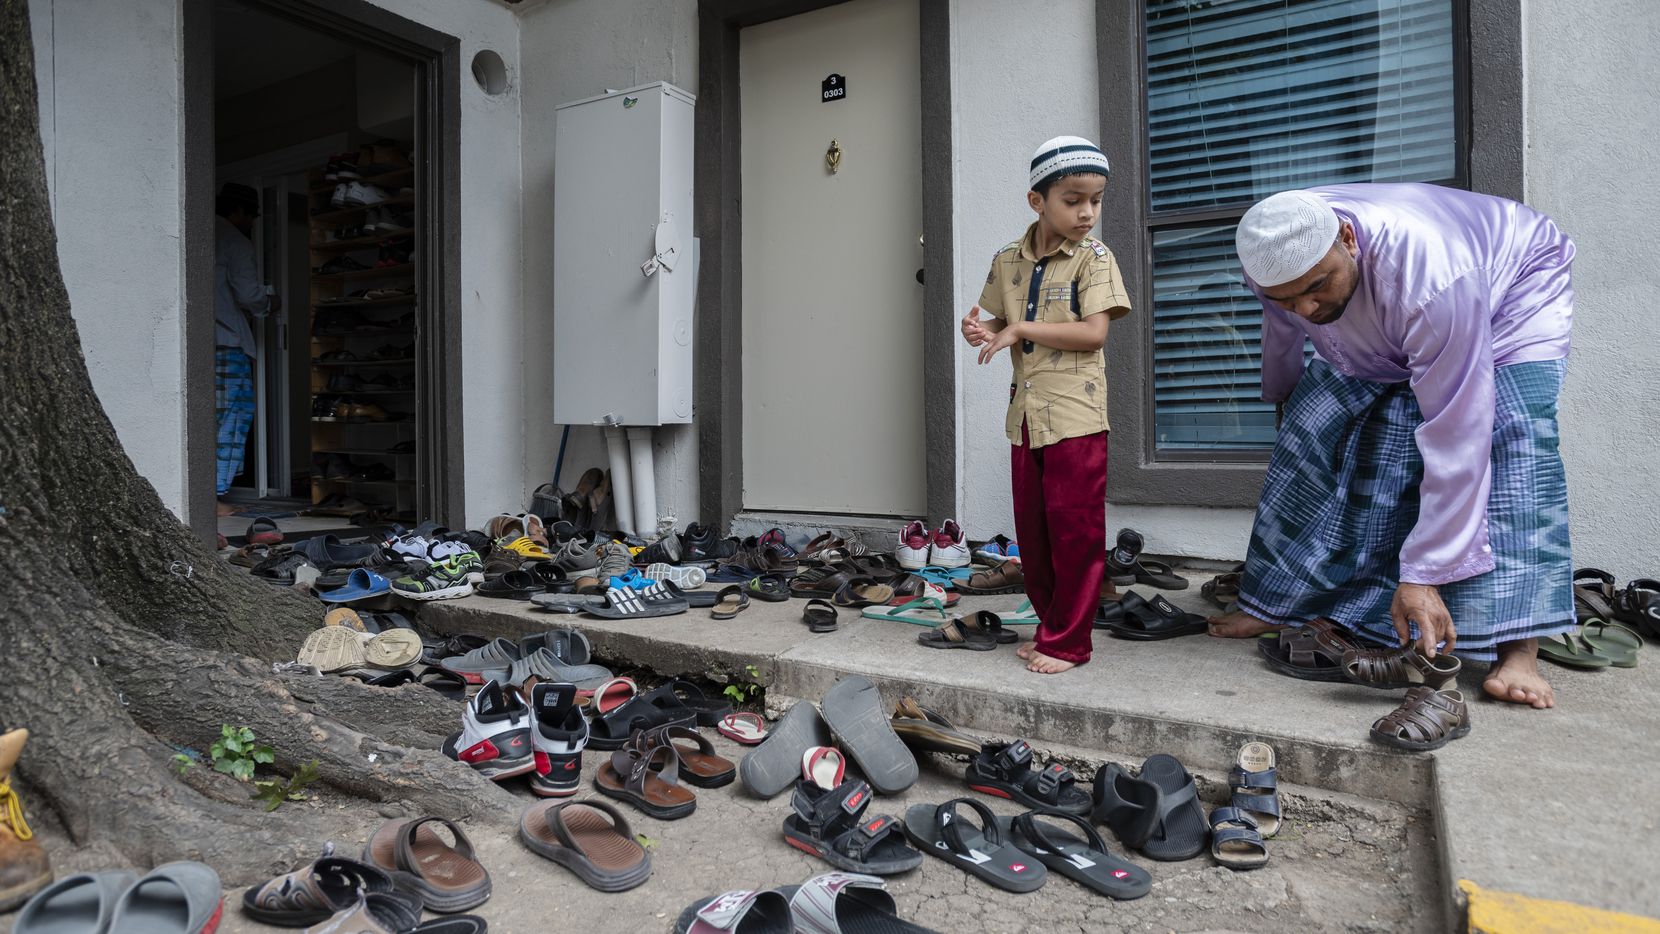 Rohingya refugees remove their shoes before entering a mosque inside an apartment complex in Dallas.